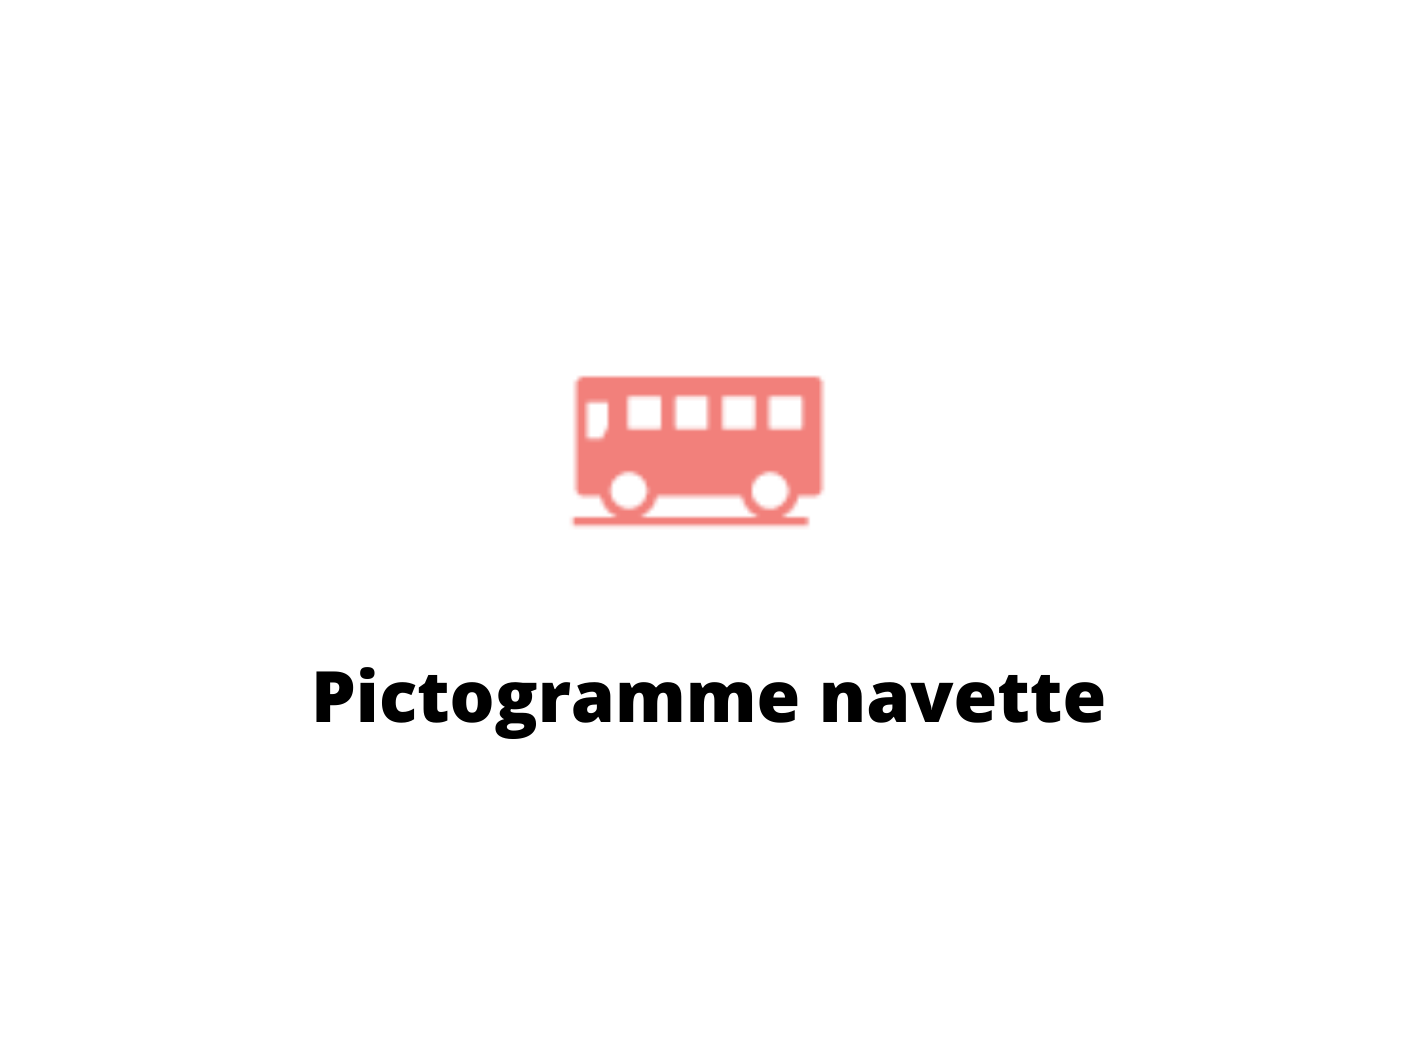 Pictogramme navette